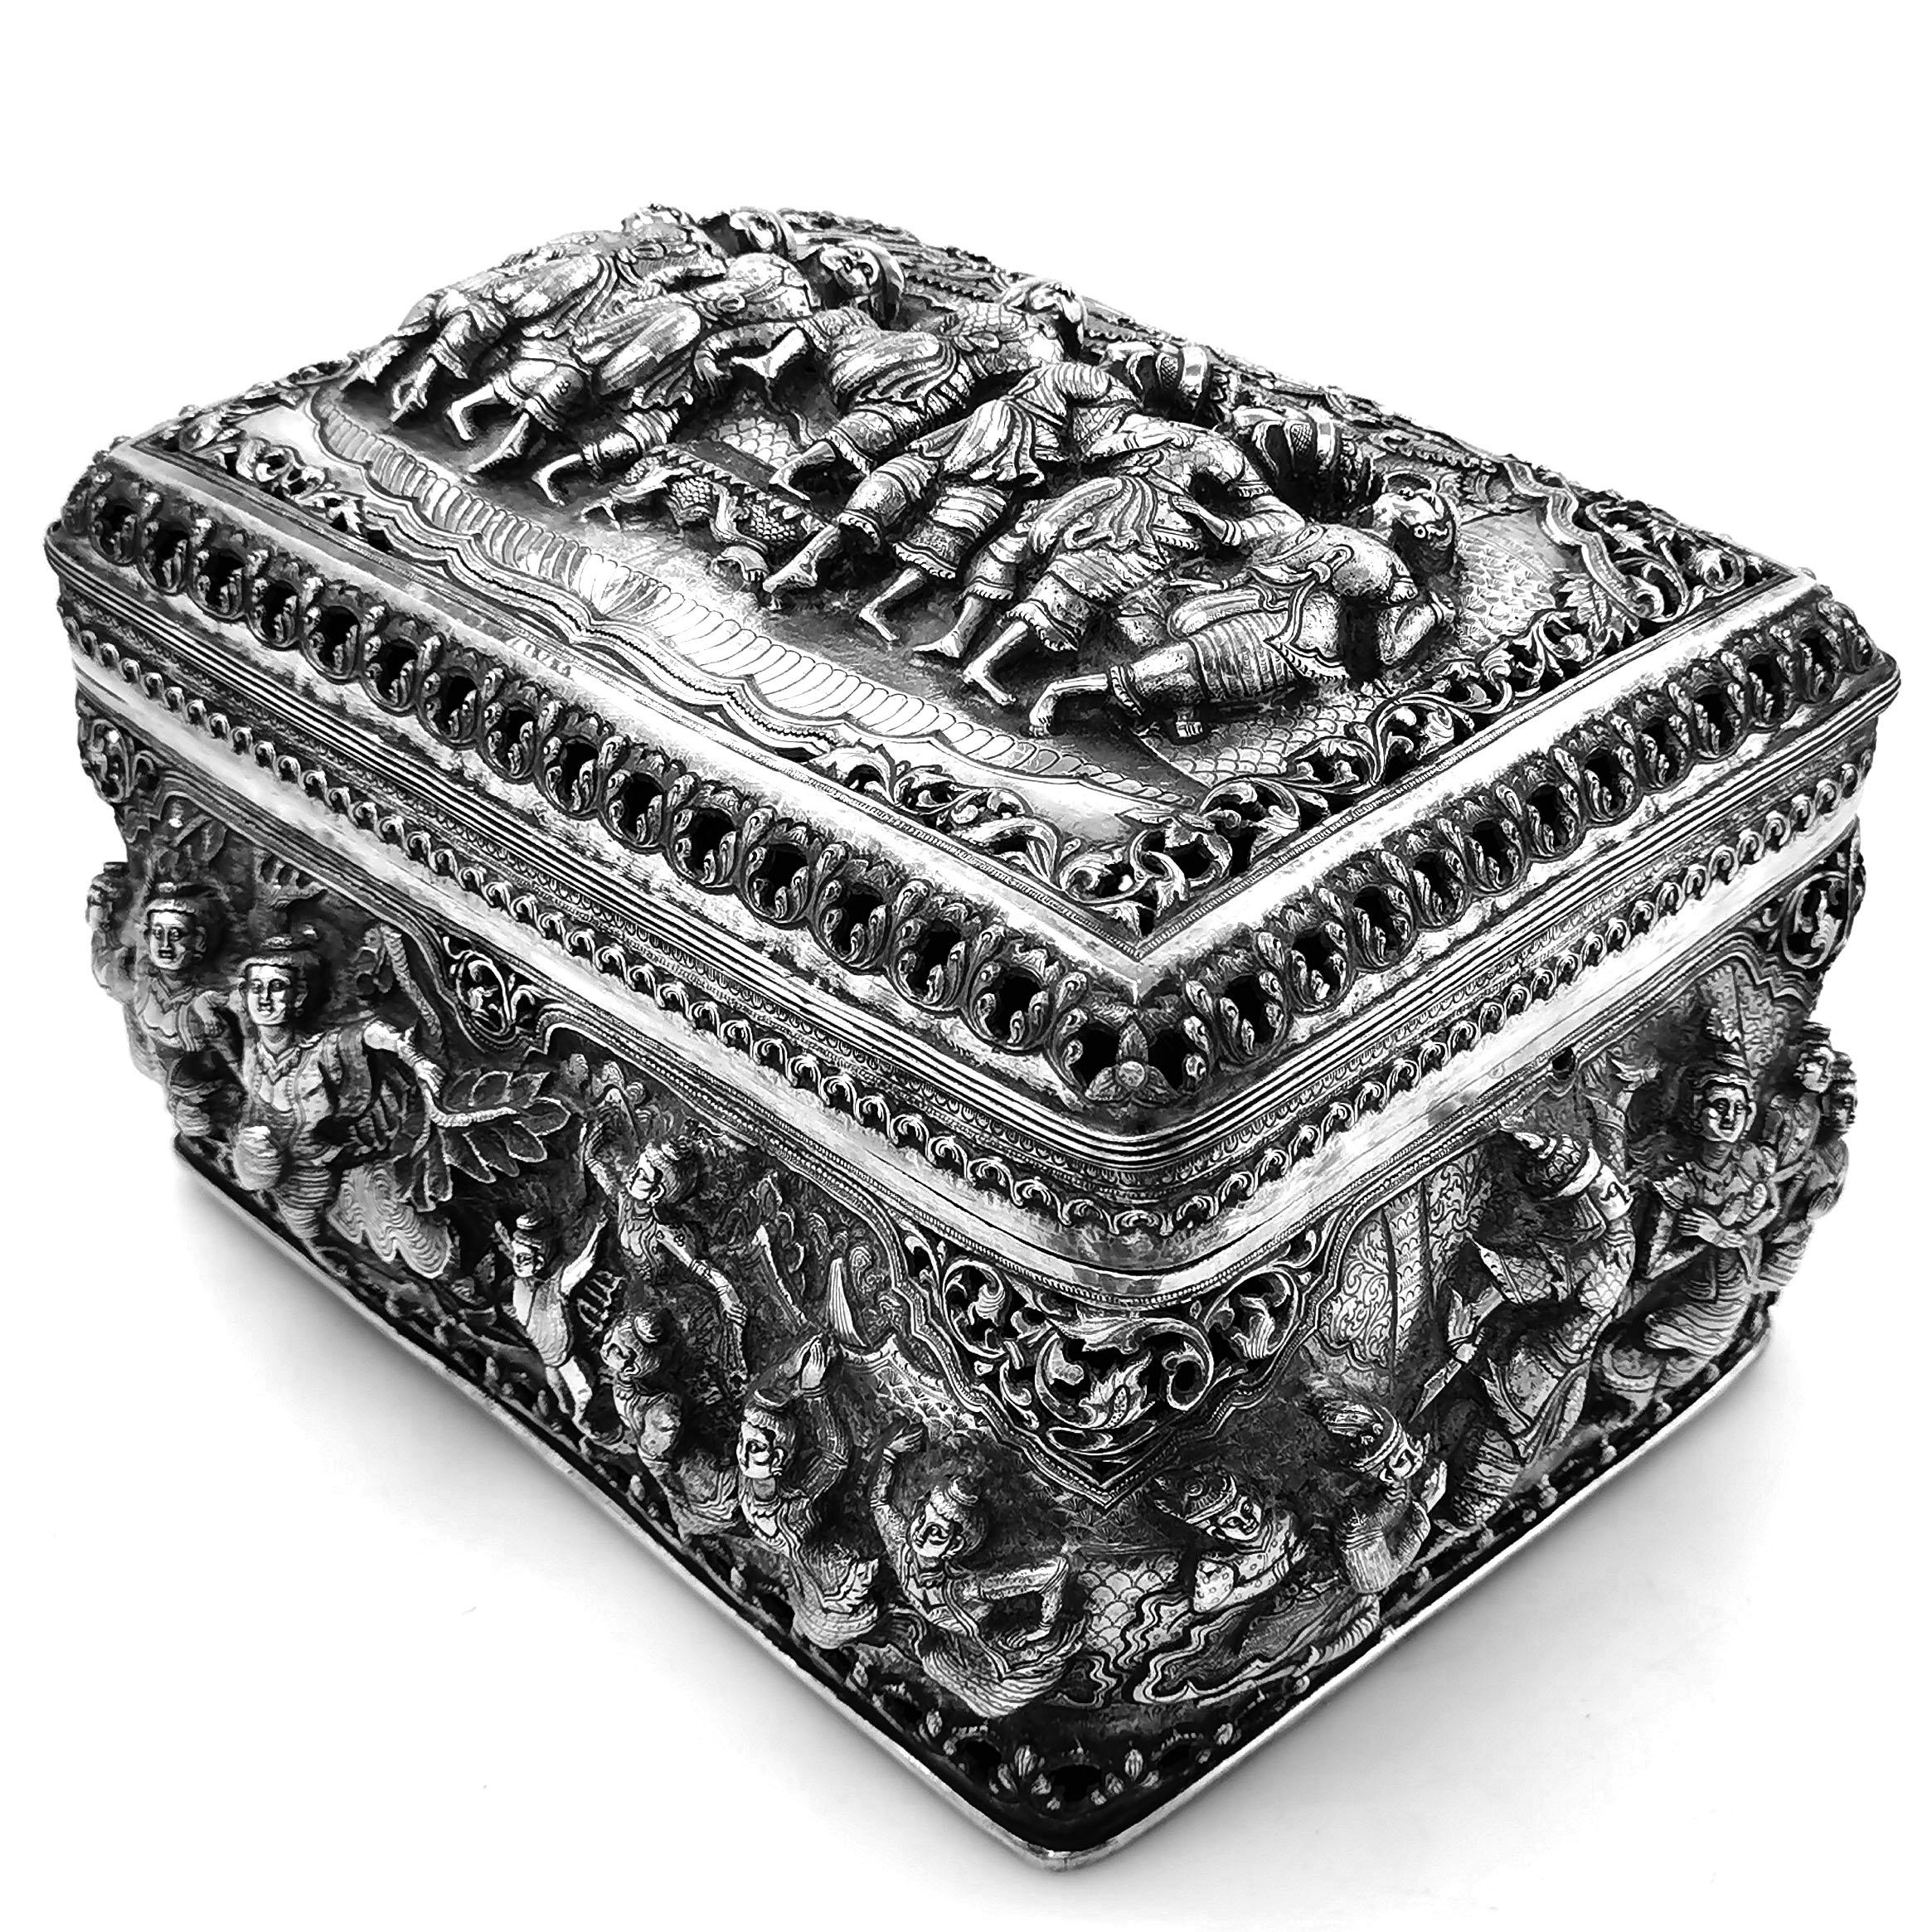 A magnificent Antique Burmese solid Silver Box with a rounded rectangular form. The sides of the Box and the lid are embellished with chased ornate designs in deep relief. The chased designs on the Box show groups of figures surrounded by trees. The